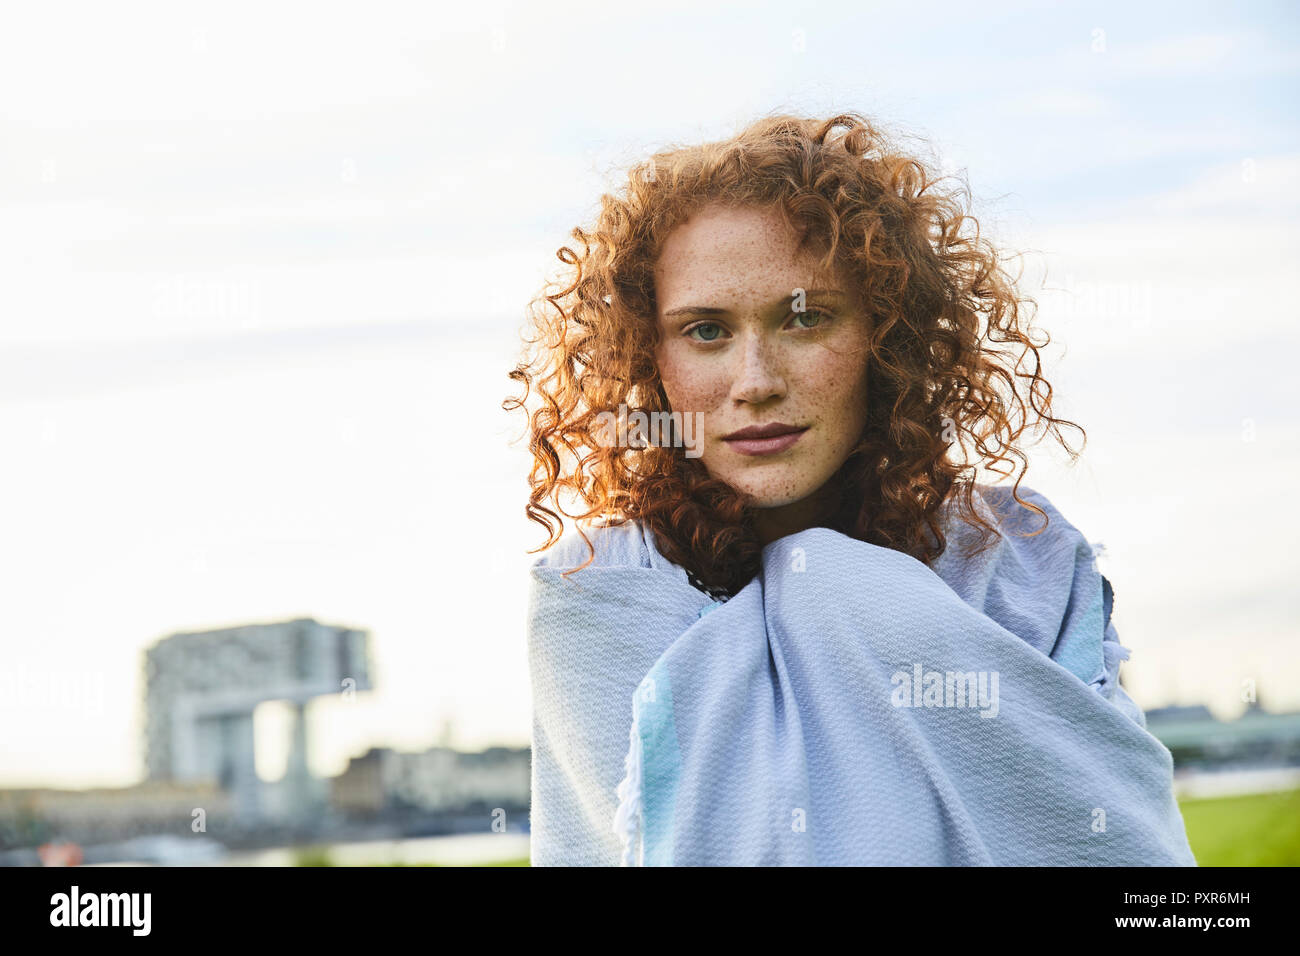 Germany, Cologne, portrait of freckled young woman Stock Photo